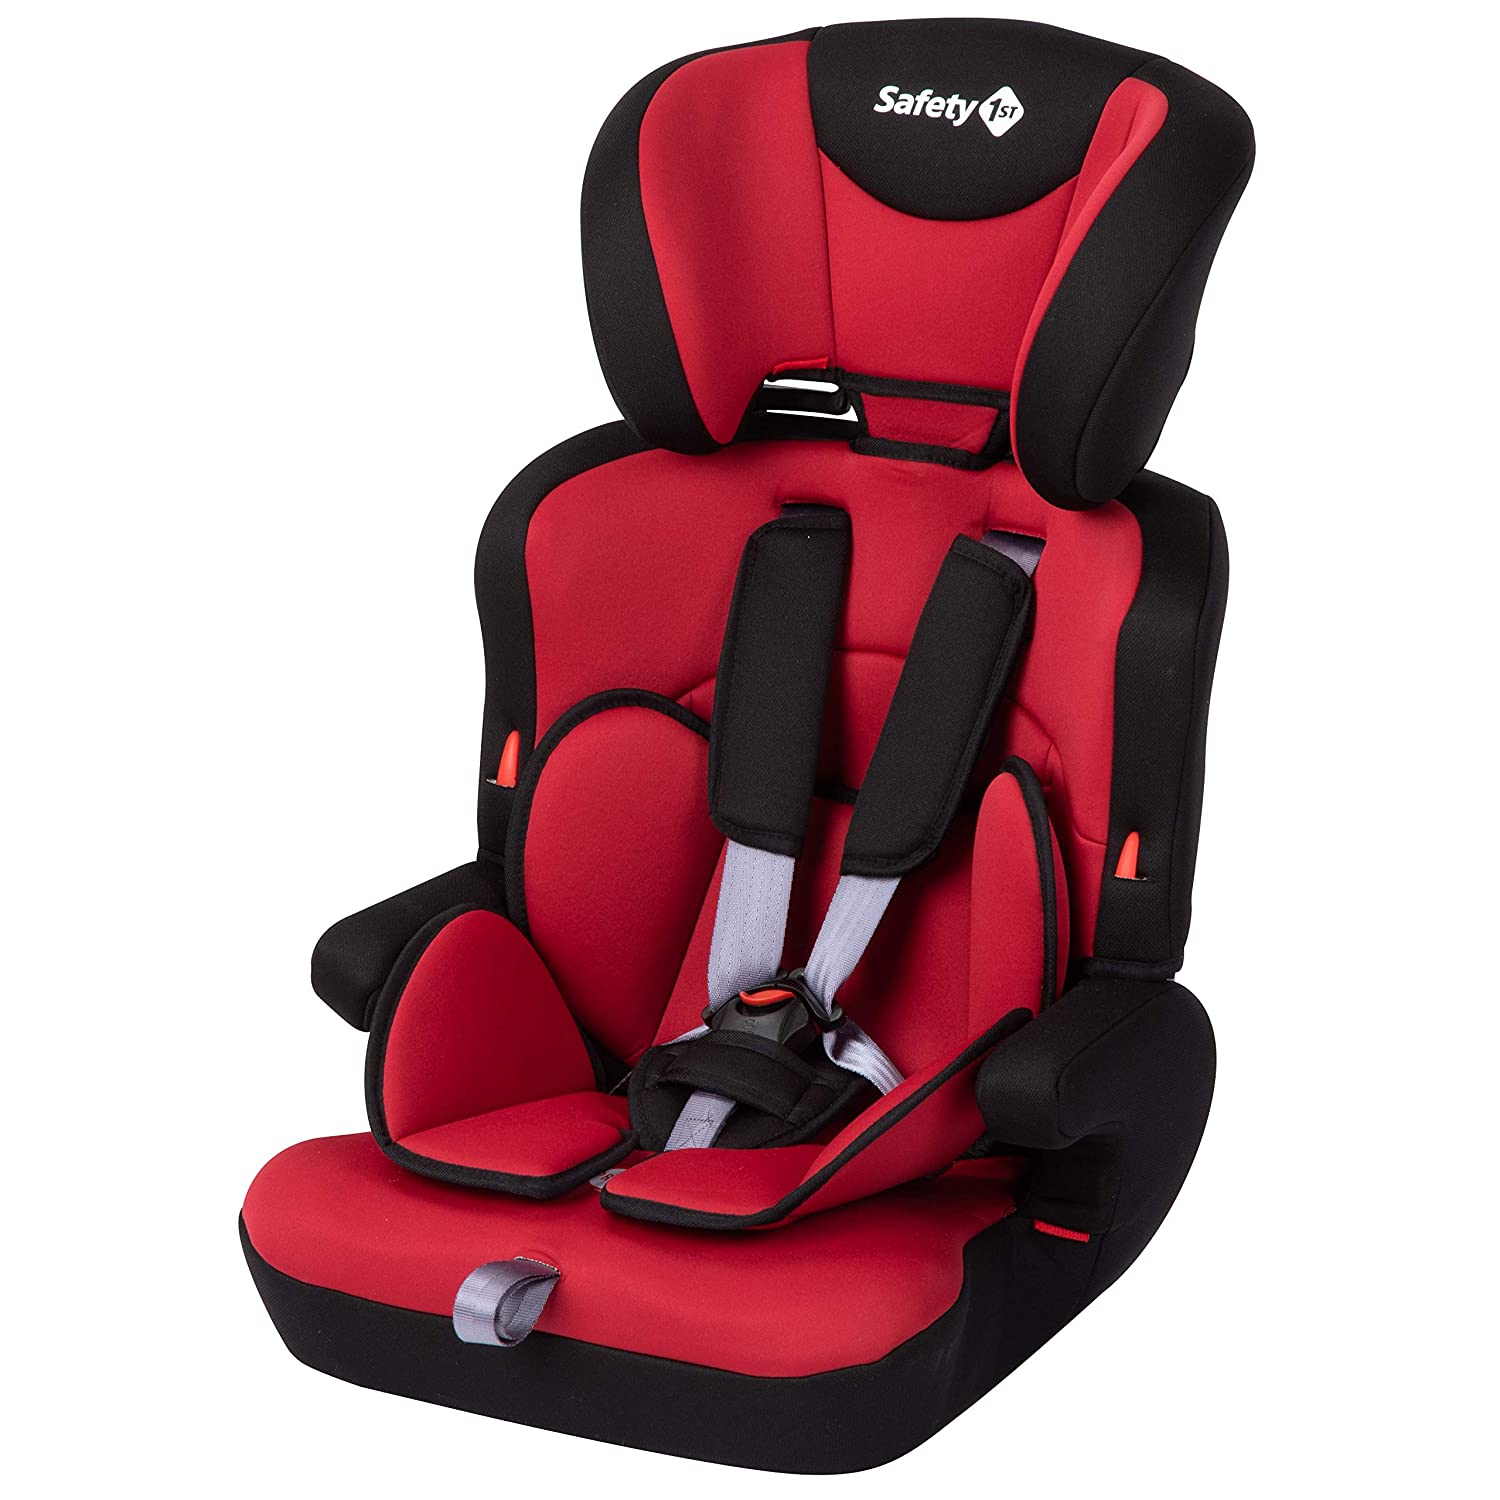 Safety 1st Ever Safe Plus or Ever Fix Child Seat, Grows with Your Child, Group 1/2/3 Car Seat with 5-Point Harness (9-36 kg), Usable from Approx. 9 Months to Approx. 12 Years